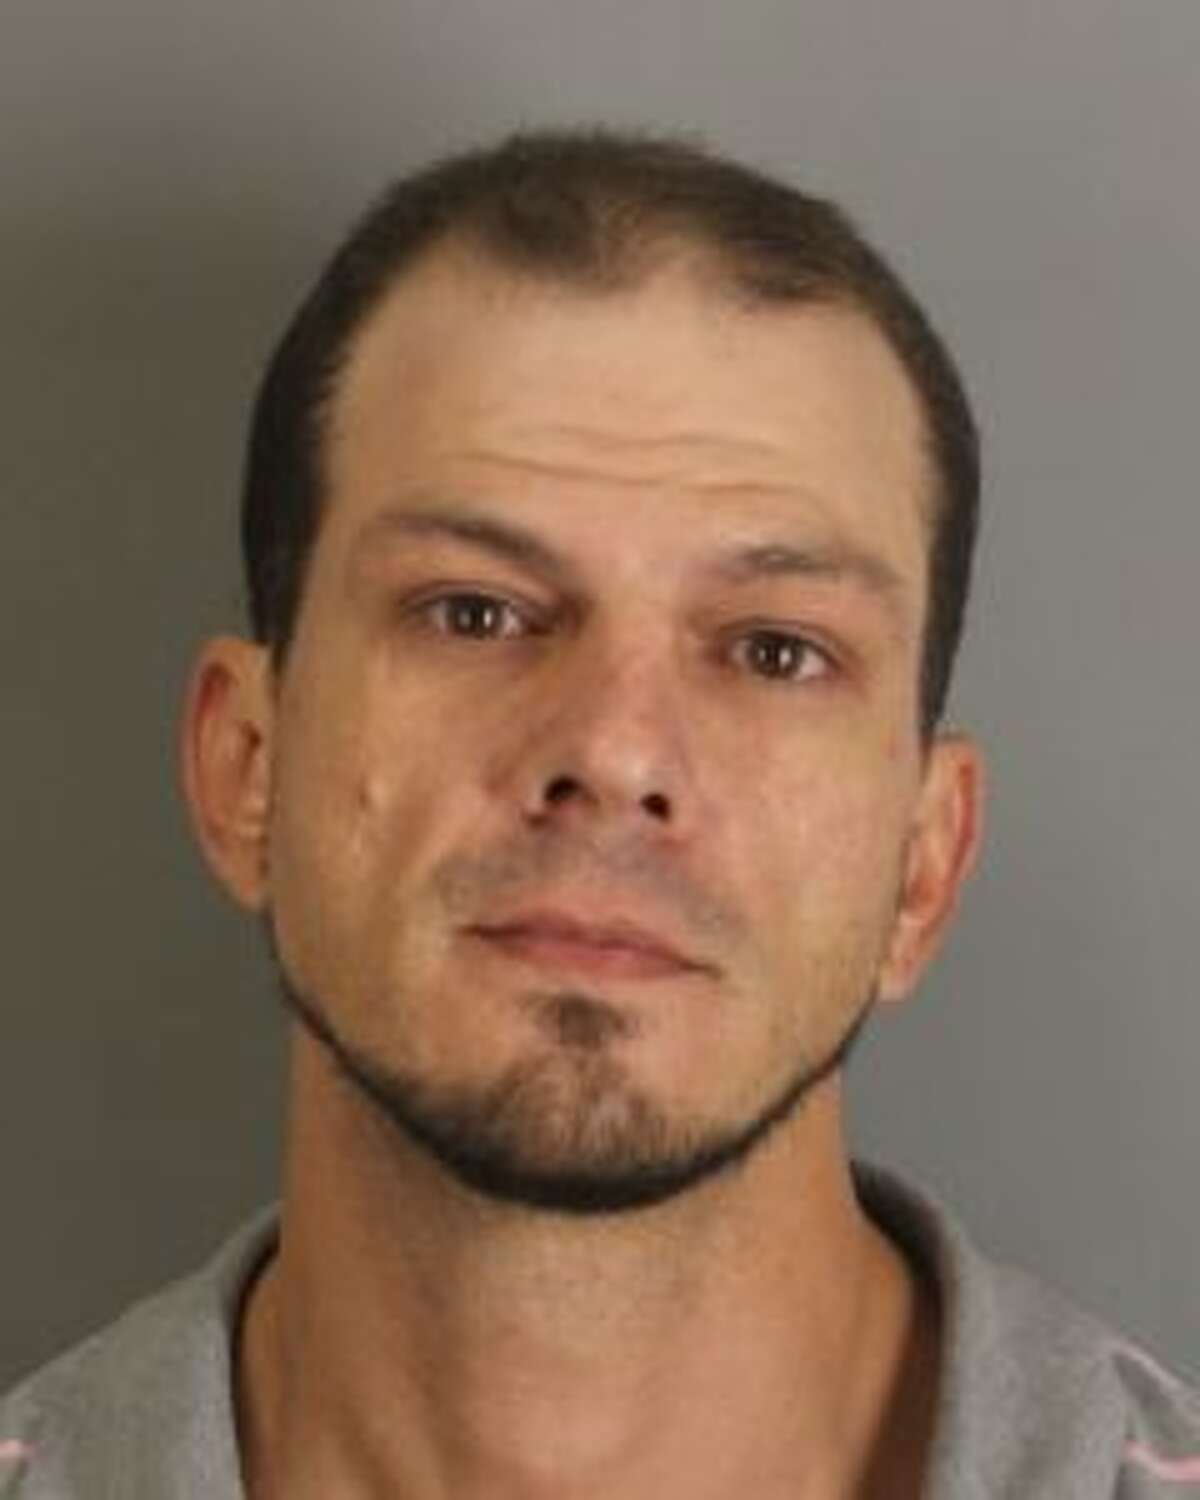 Dustin Terro, 38, was arrested on Dec. 28, 2017 in connection with a reported burglary at a American Bedroom furniture store. Photo: Beaumont Police Department.